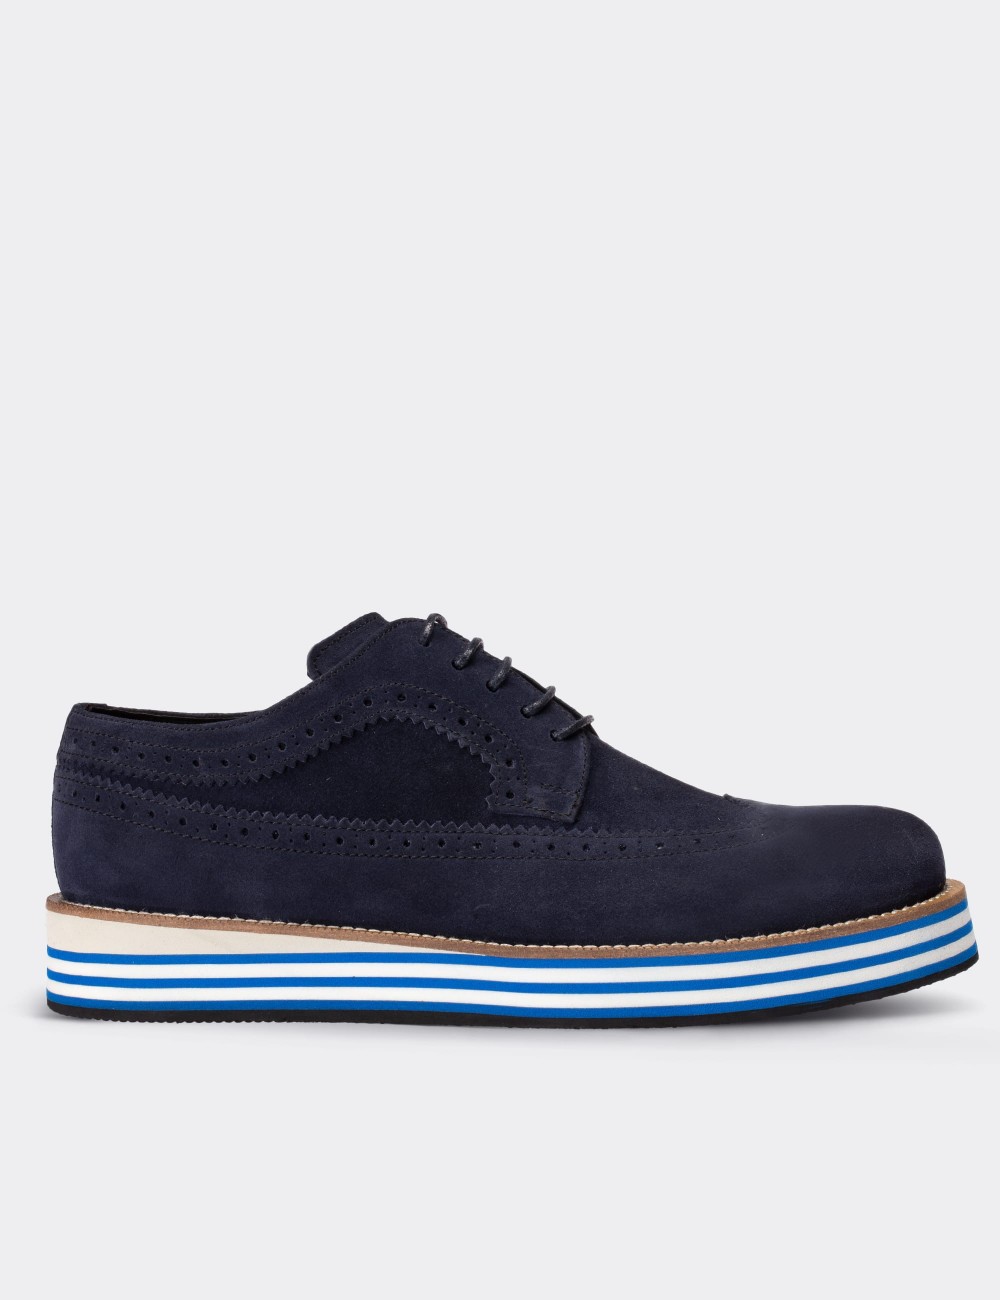 Navy Suede Leather Lace-up Shoes - 01293MLCVE32